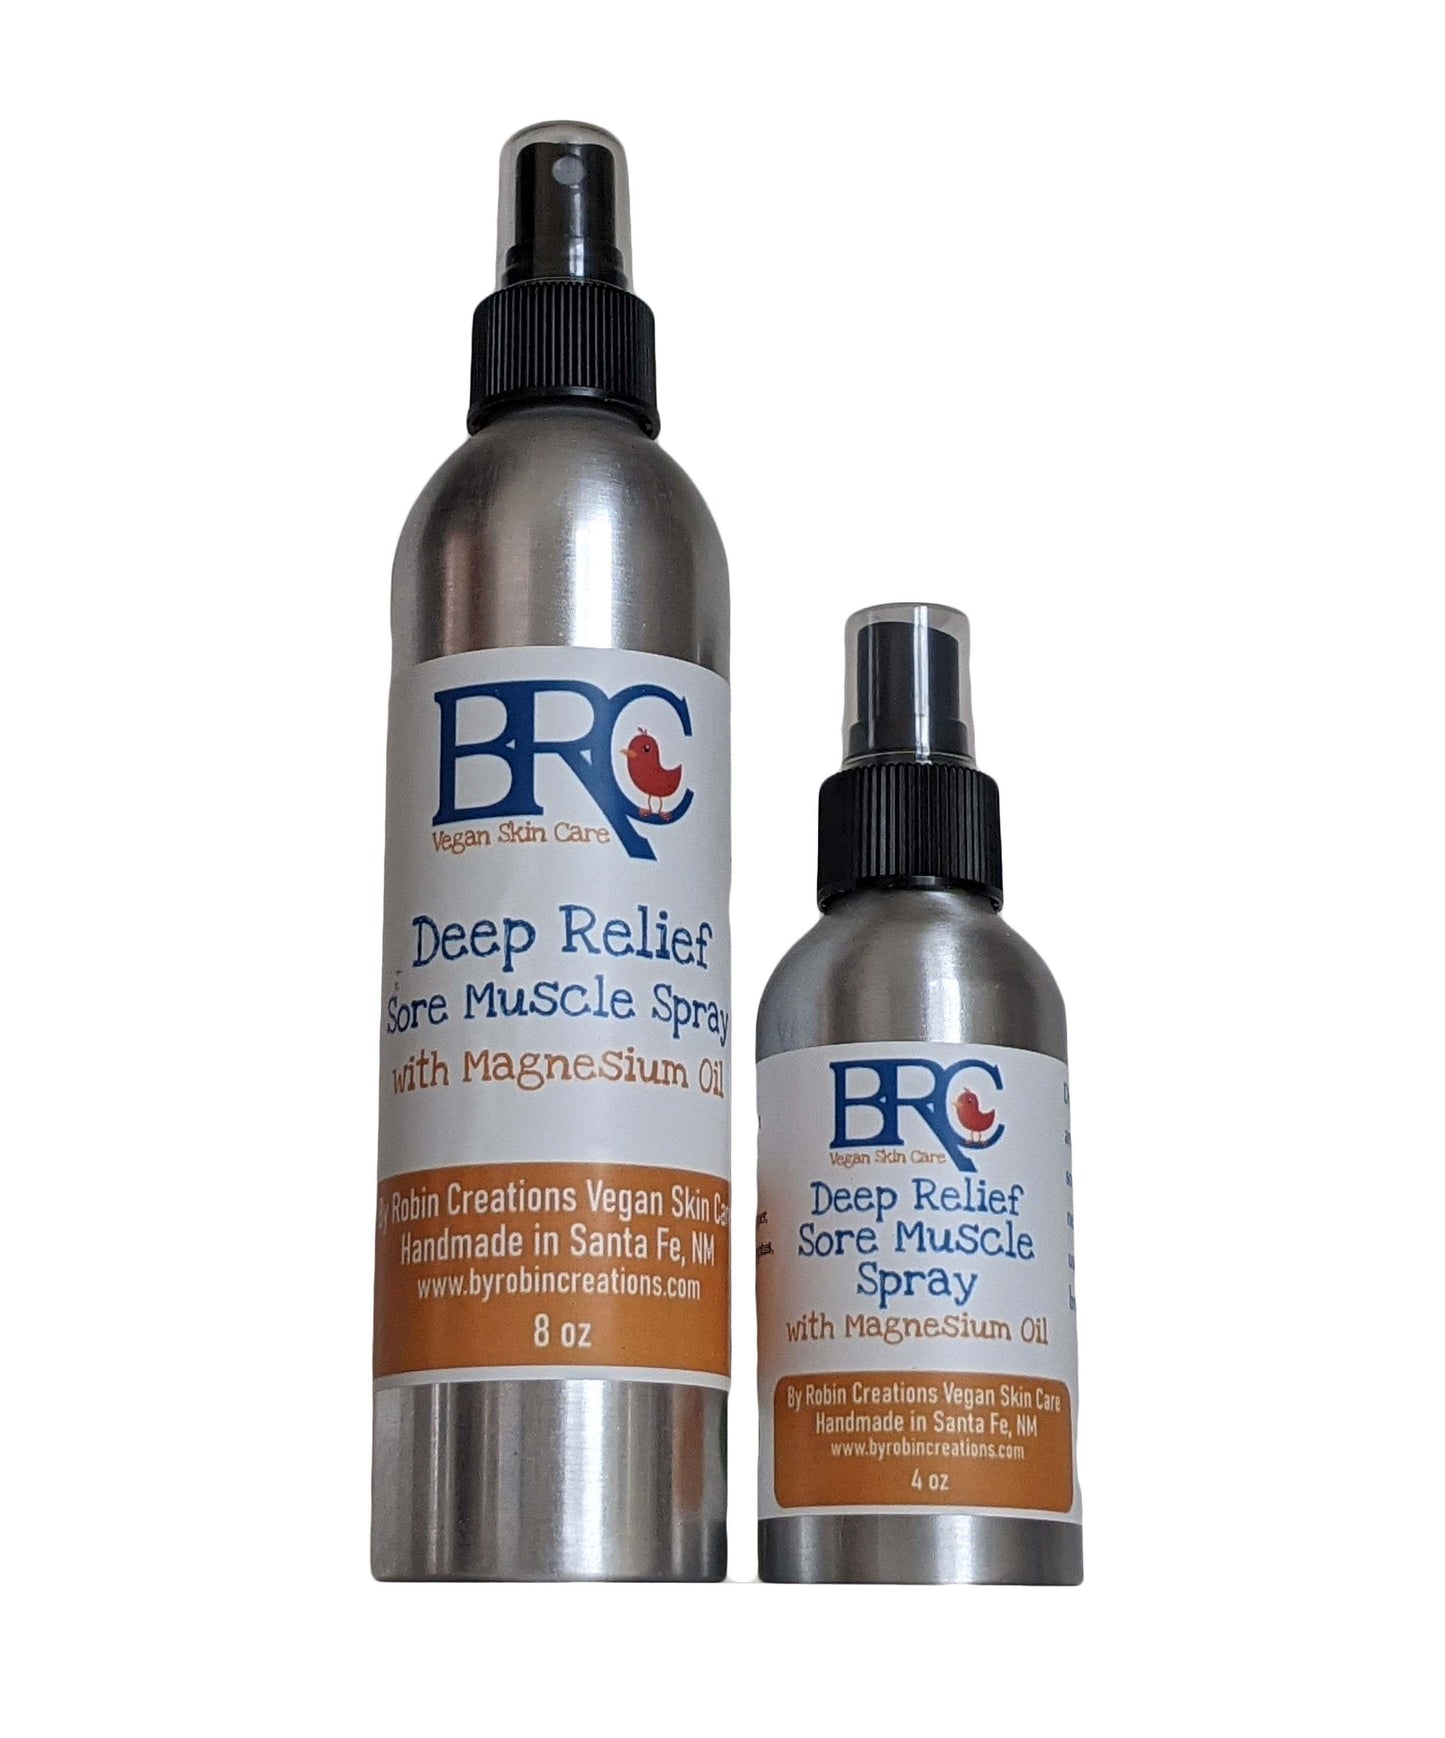 LAST CHANCE! Deep Relief Sore Muscle Spray